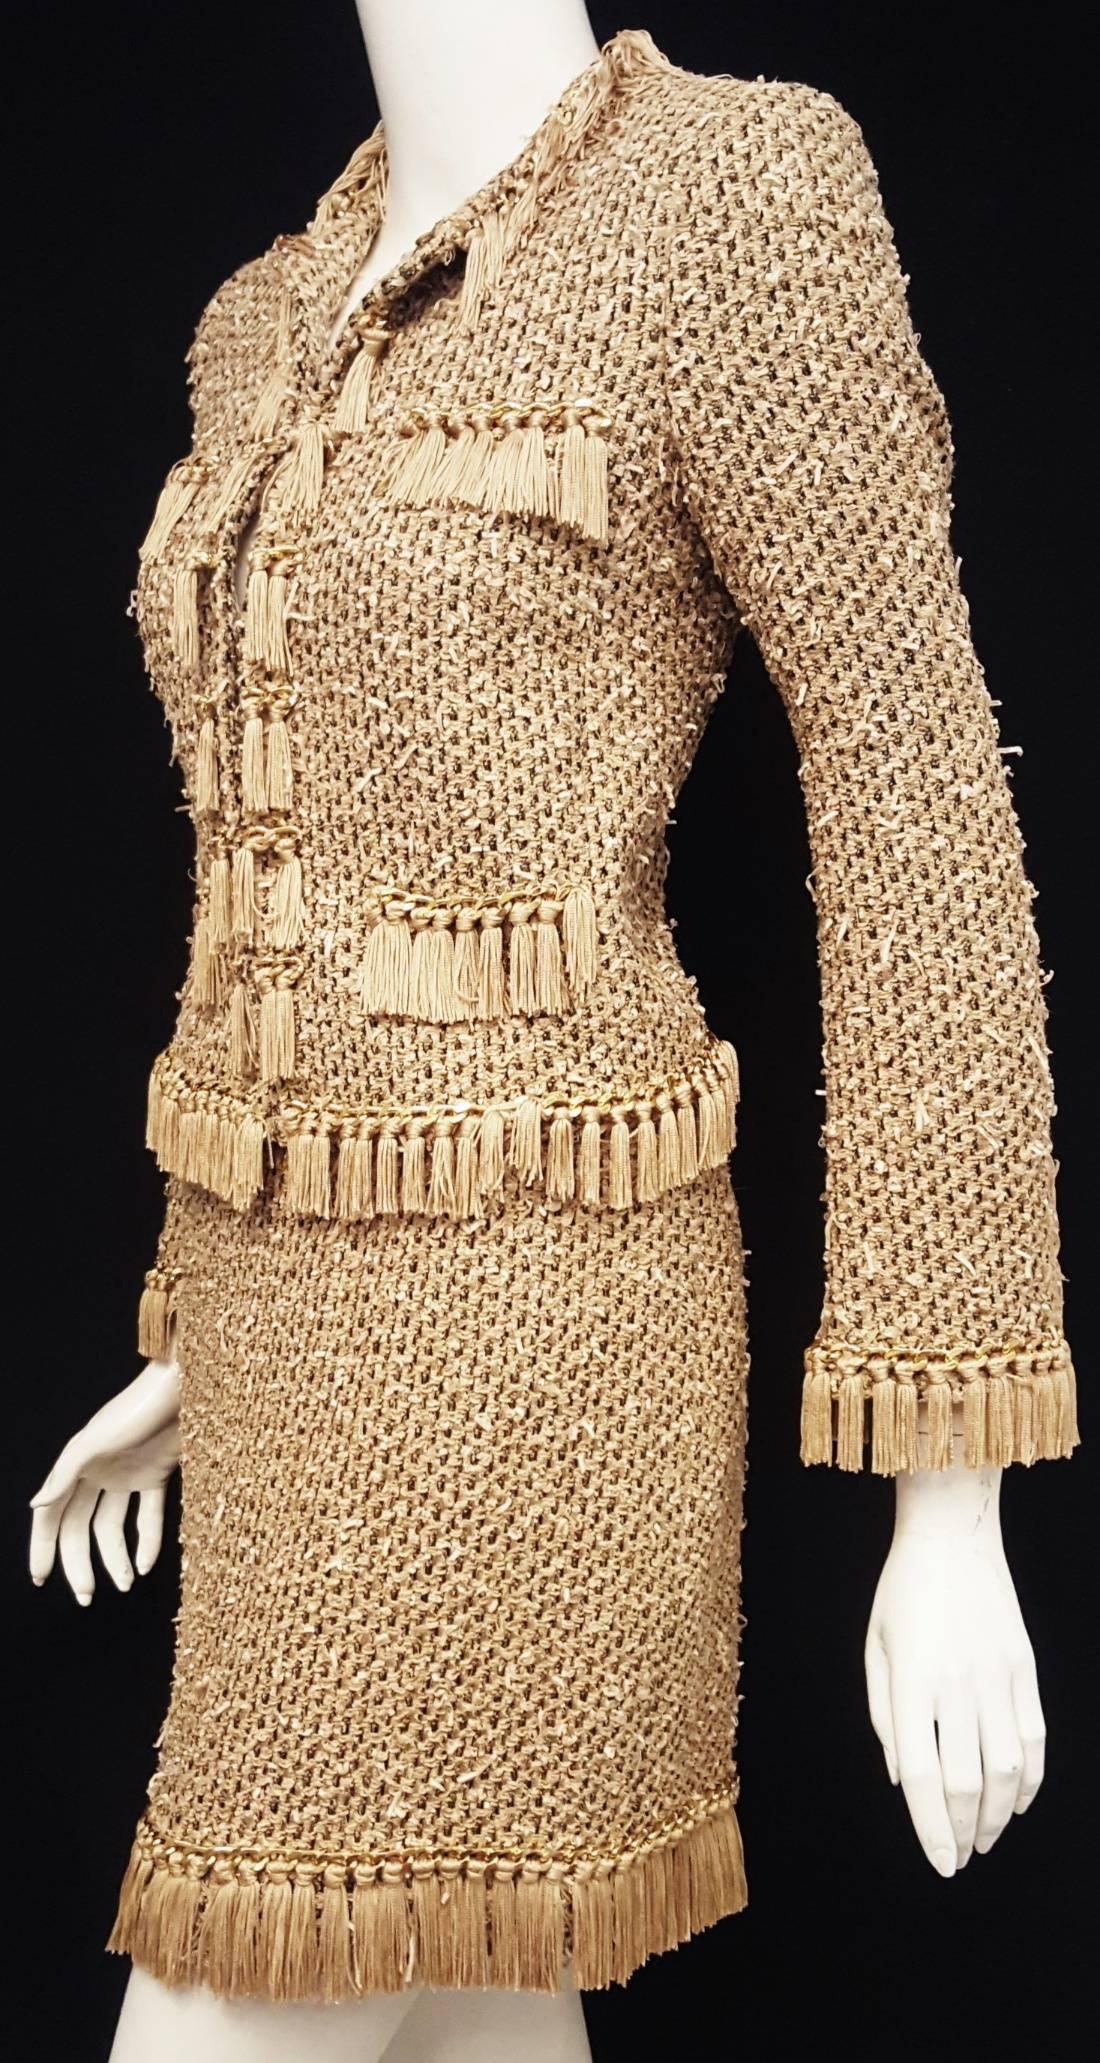 Moschino taupe, beige and black suit with tan fringe on jacket and skirt and a shiny gold tone chain is intricately decorated.  The fabric has woven into it tiny ribbons in ivory that are gently distressed giving the fabric a more textured look. 